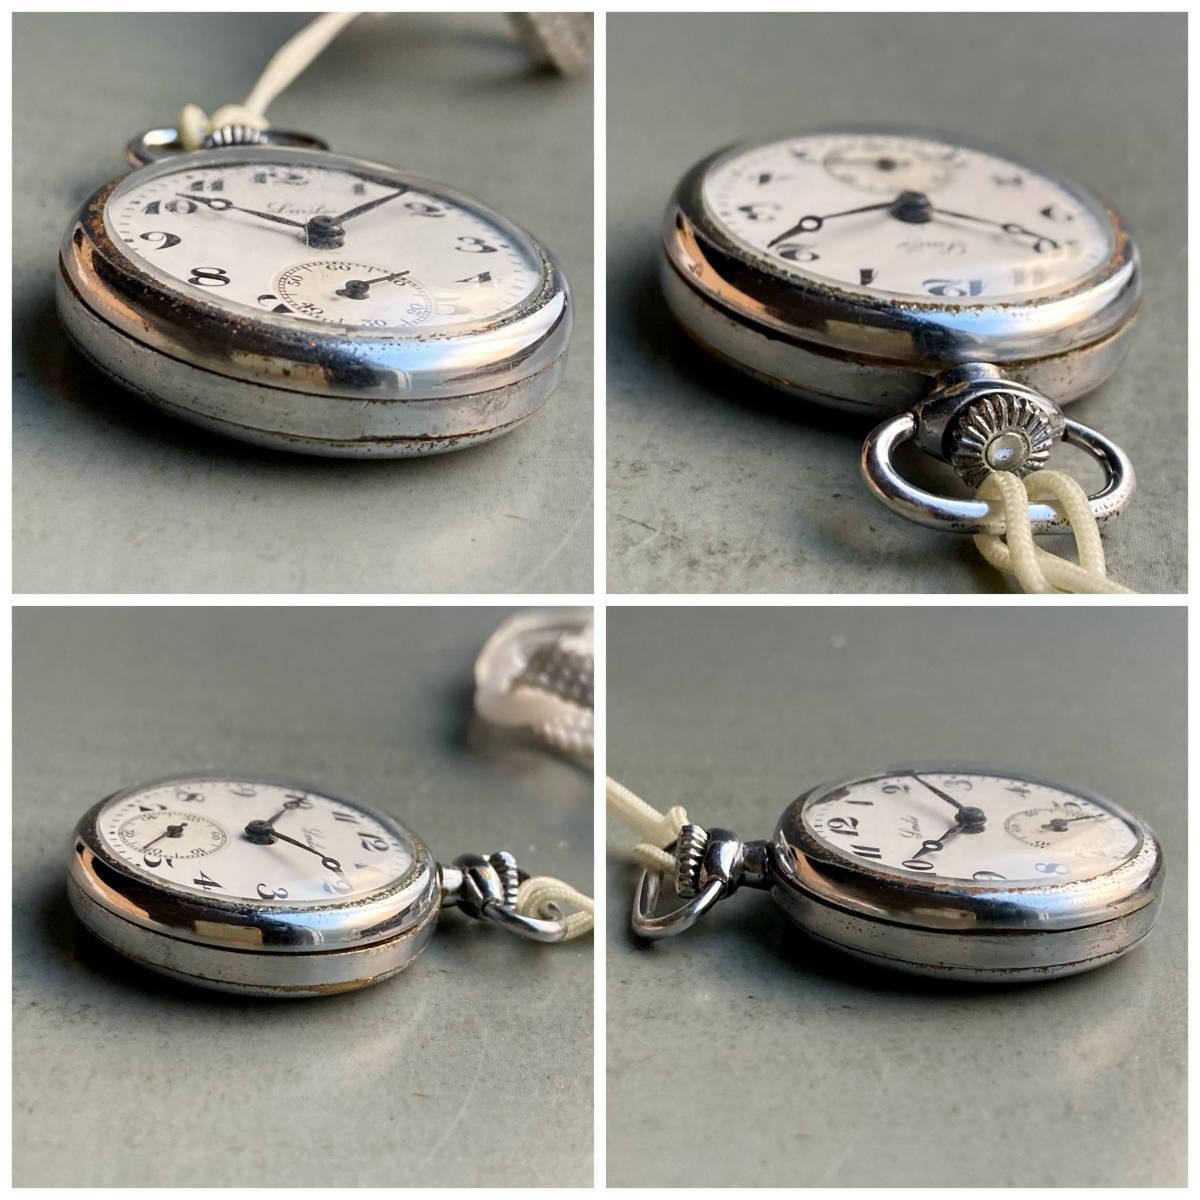 Smile Pocket Watch Antique Manual Open Face 27mm Vintage Pocket Watch Silver - Murphy Johnson Watches Co.